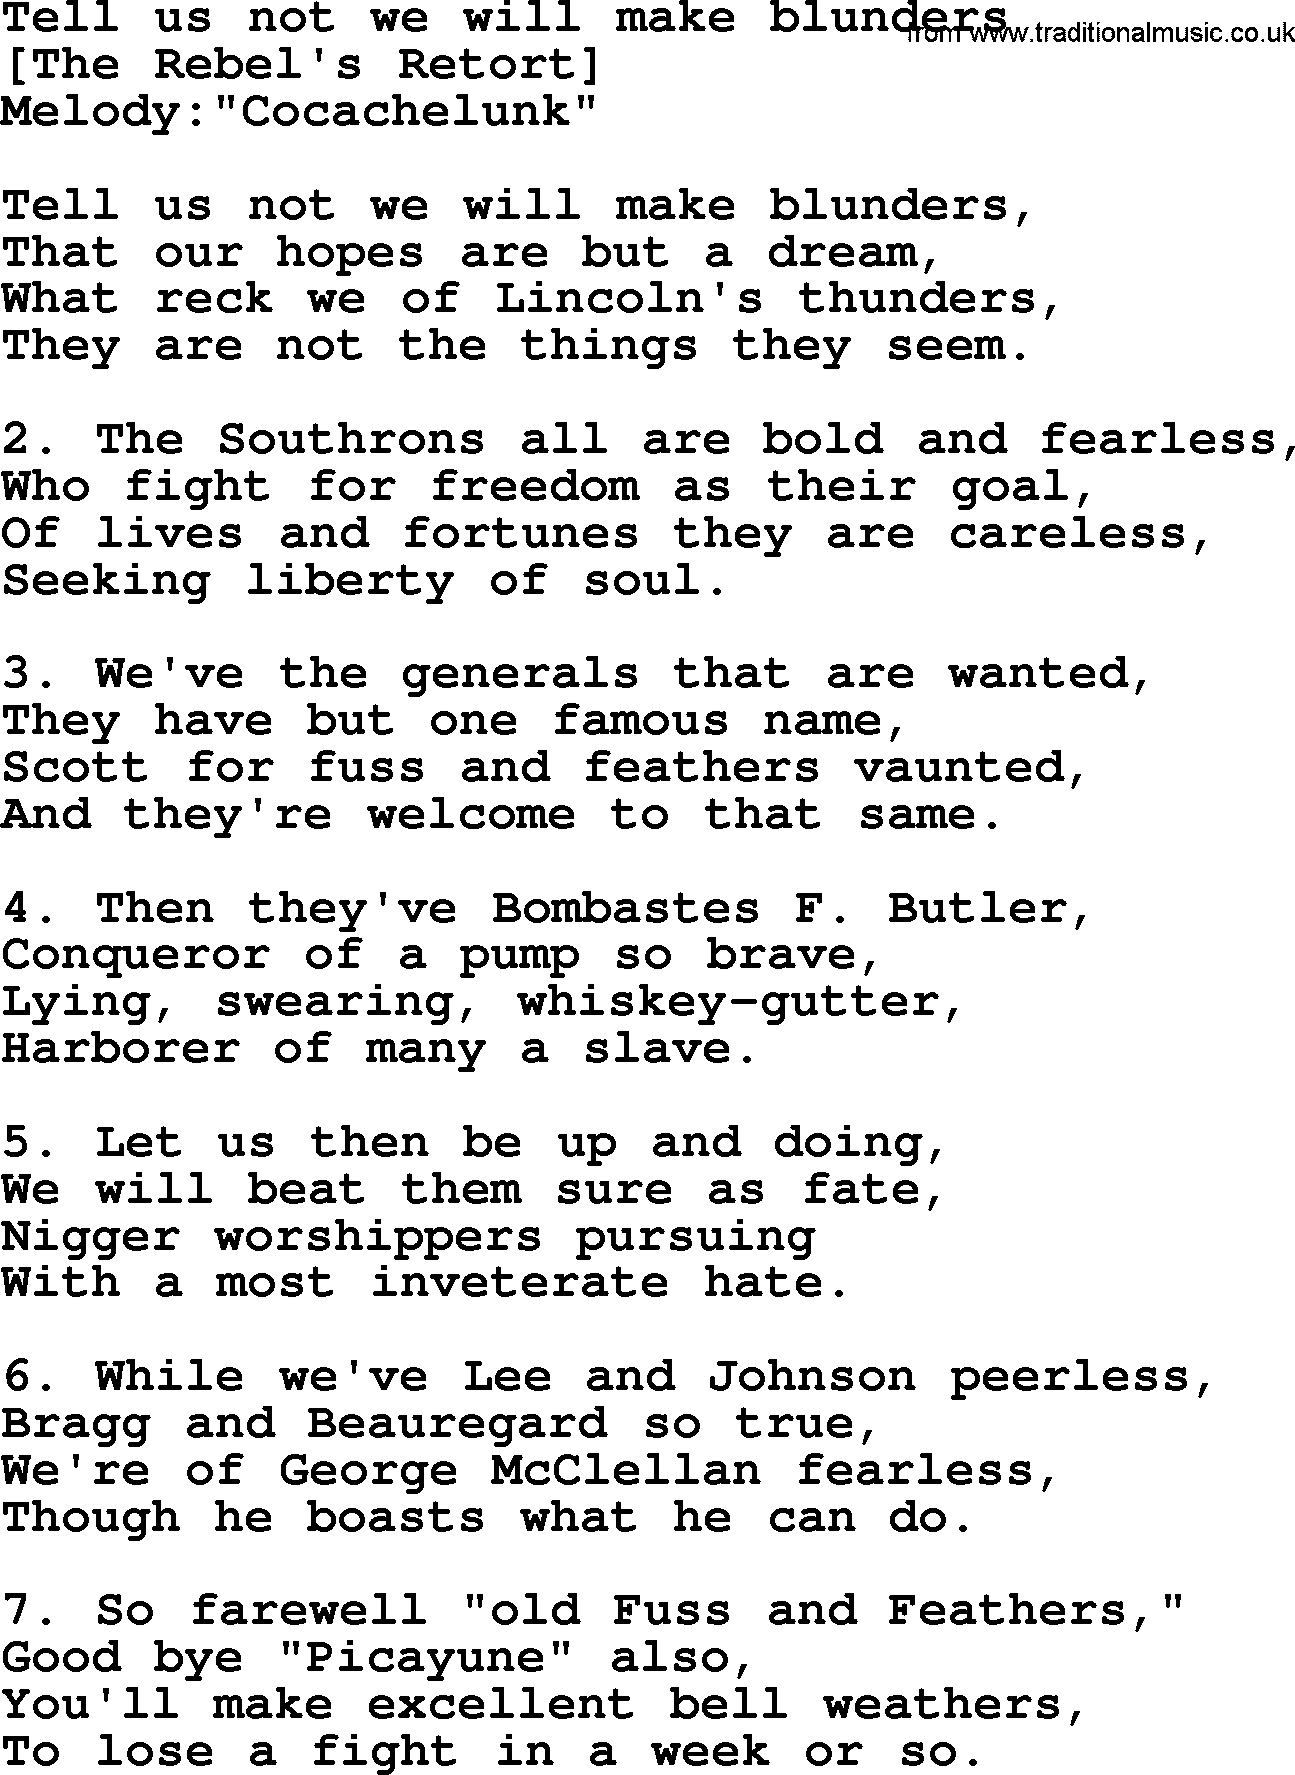 Old American Song - Lyrics for: Tell Us Not We Will Make Blunders